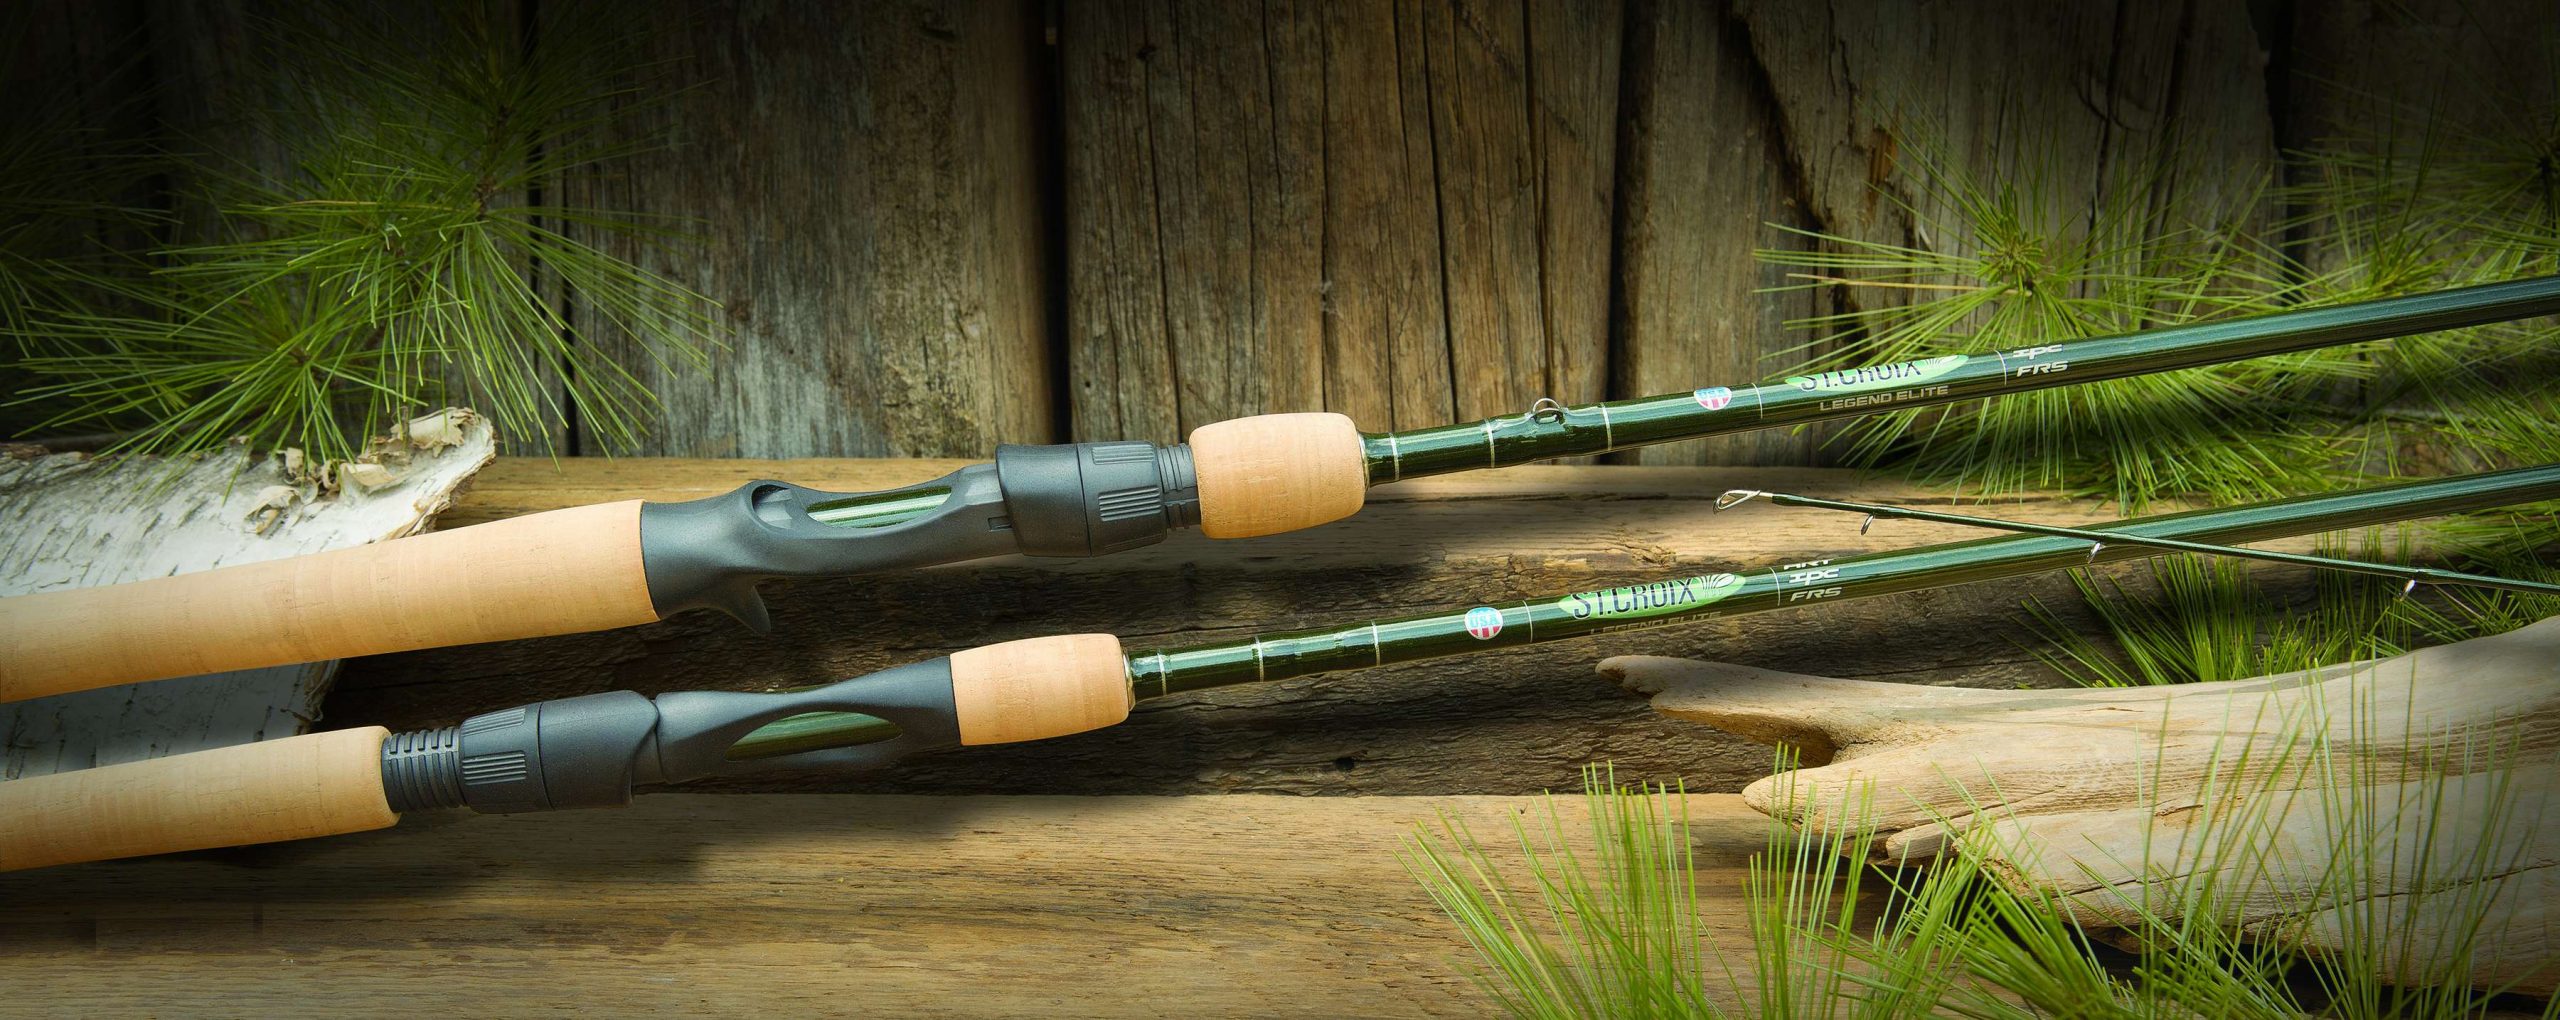 <b>St. Croix</b><br>	Legend Elite<br>			St. Croix has overhauled their flagship freshwater series, the Legend Elite. This already-legendary rod is now even better with strong, lighter material, including Torzite, which is the first ceramic created specifically for fishing rod guides. These rods come with a 15-year transferable warranty and are not cheap. But this is definitely a case of  